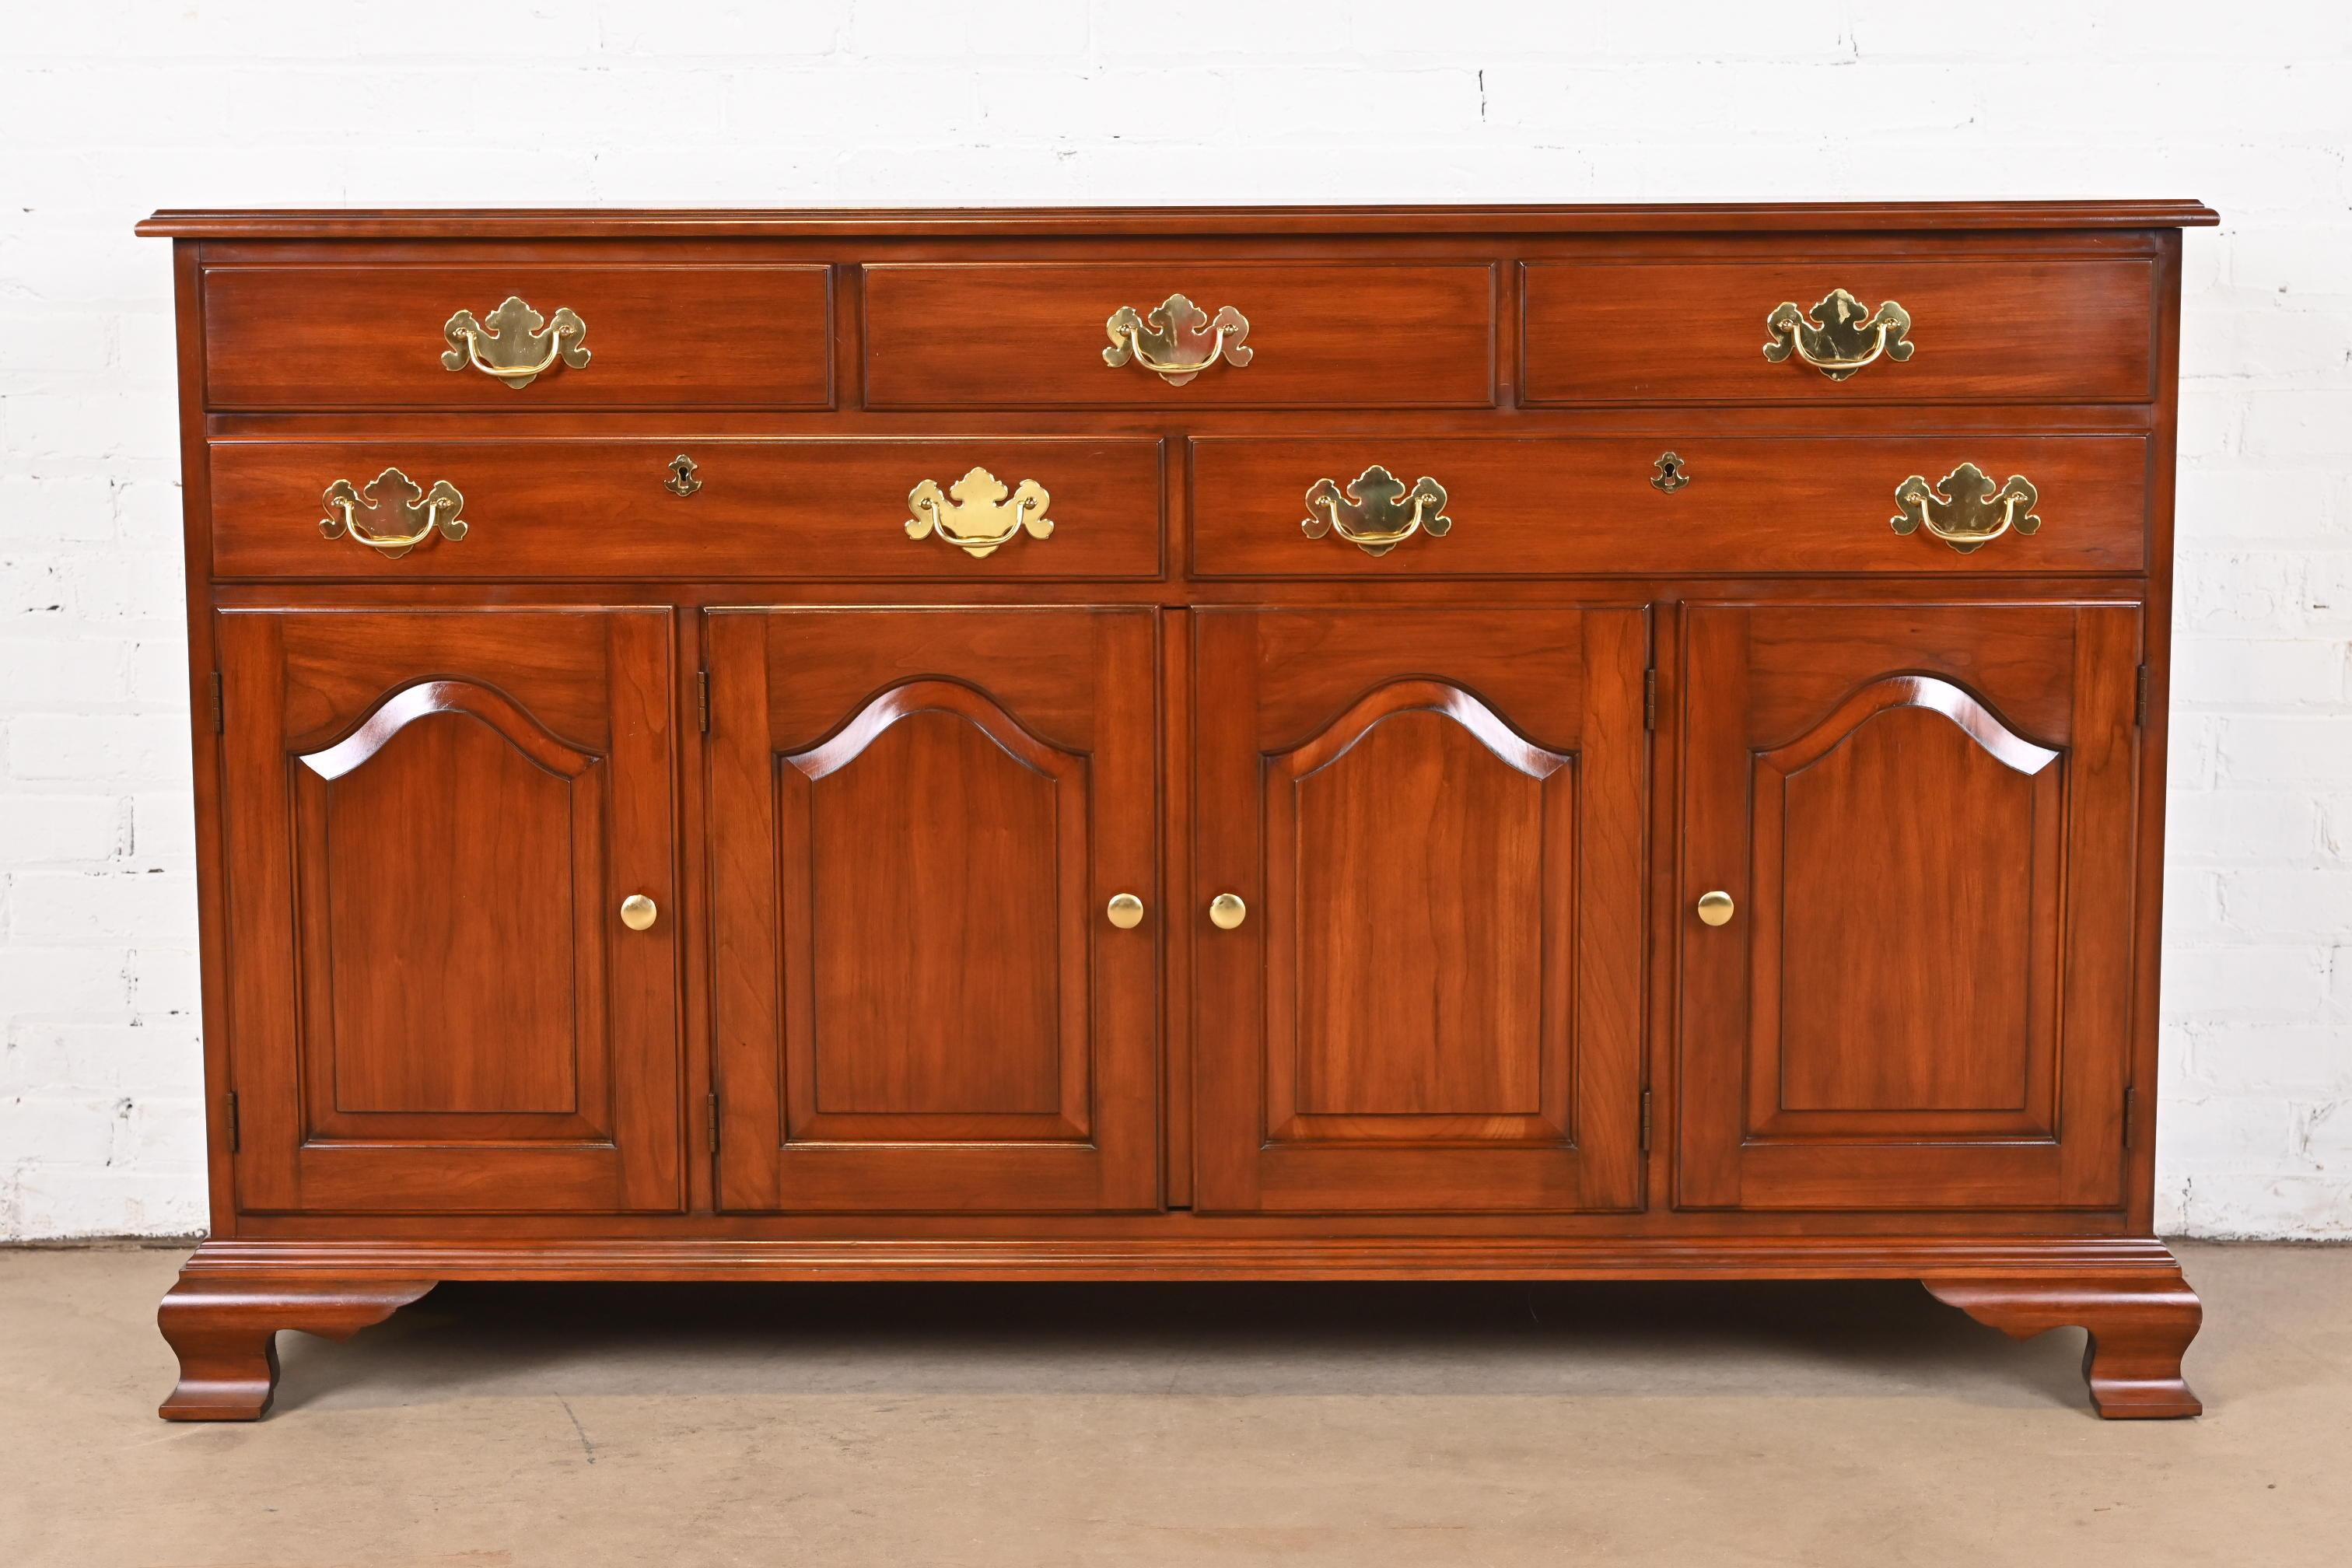 A gorgeous American Colonial or Chippendale style sideboard, buffet server, or bar cabinet

By Henkel Harris

USA, 1980s

Solid wild black cherry wood, with original brass hardware. Two drawers lock, and key is included. Lower cabinet with interior